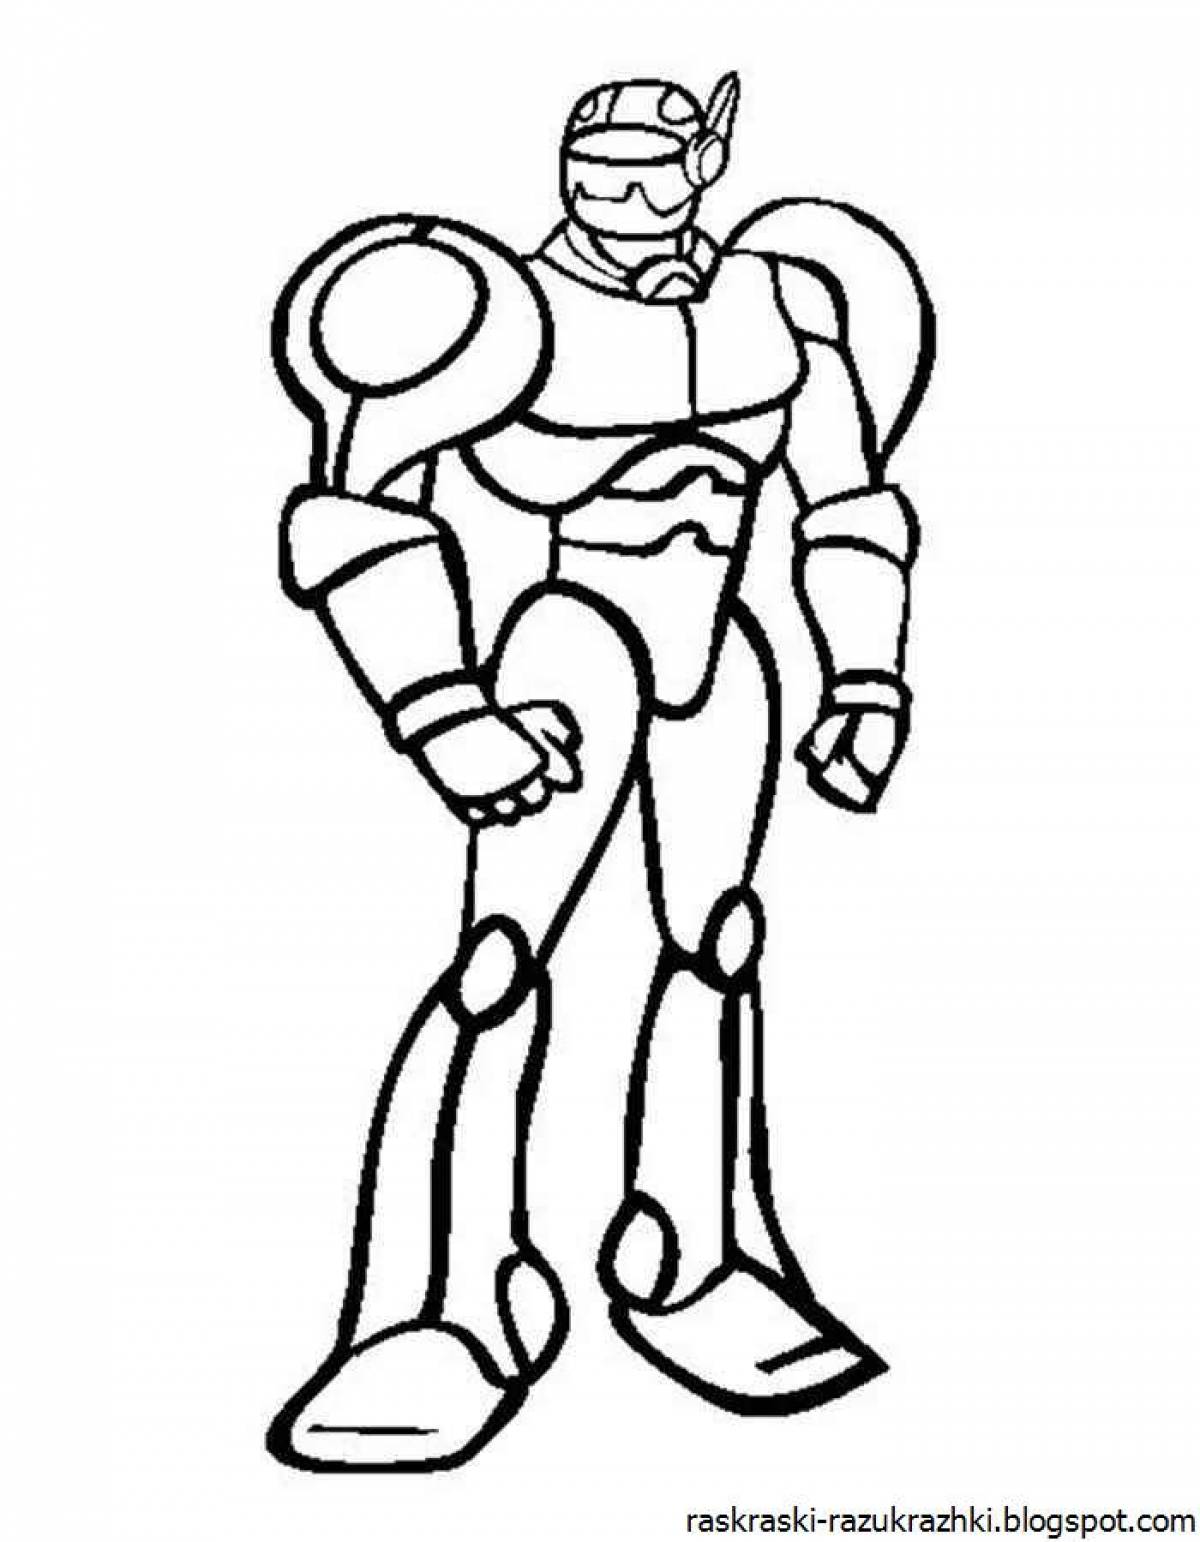 Playful robot coloring book for 3-4 year olds